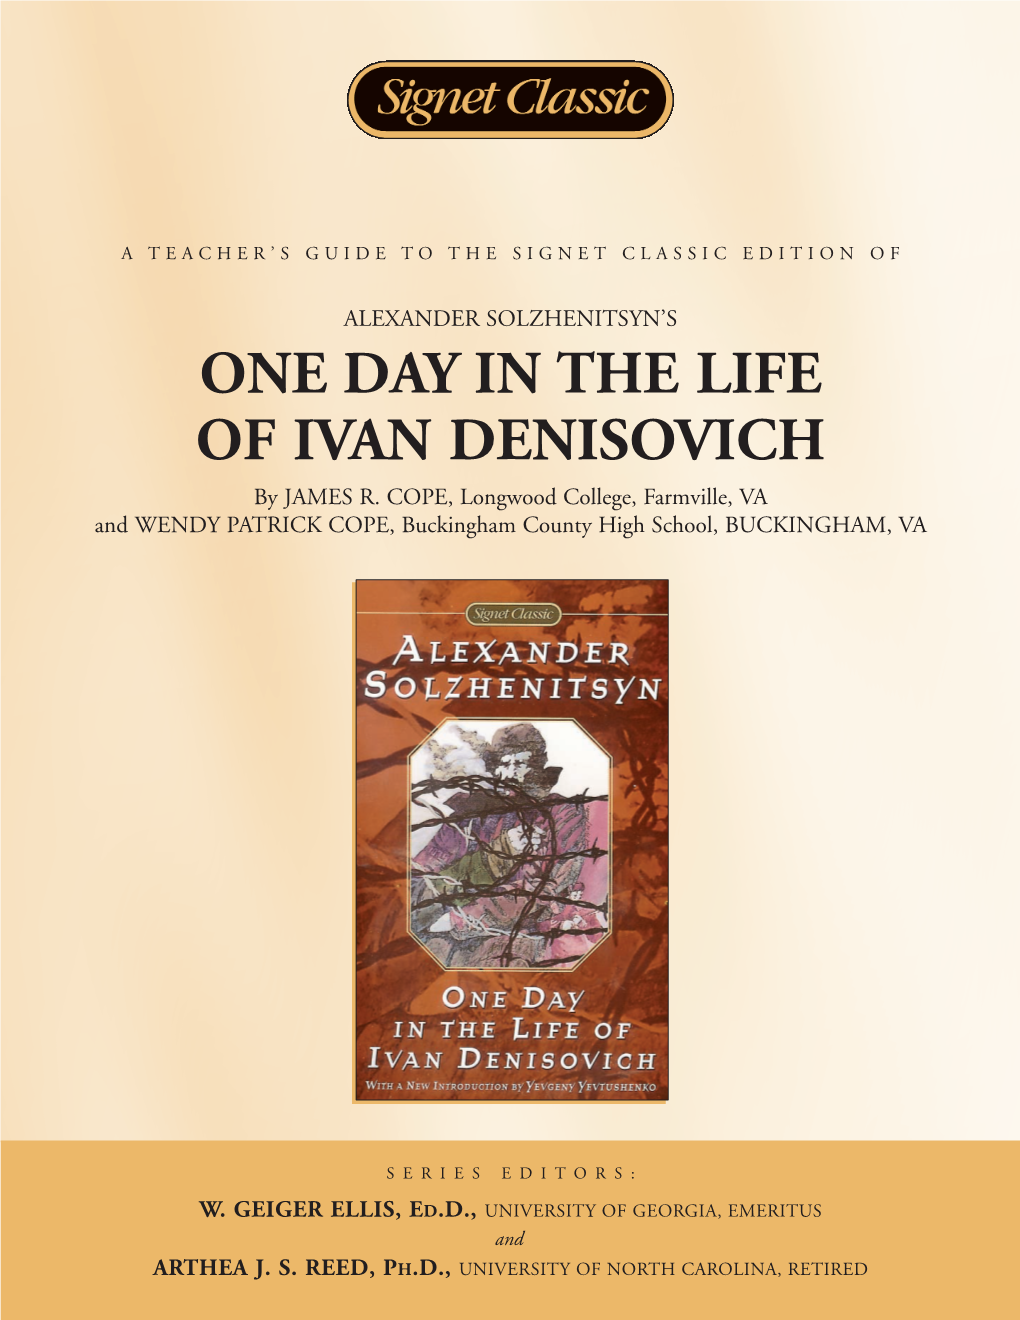 ONE DAY in the LIFE of IVAN DENISOVICH by JAMES R